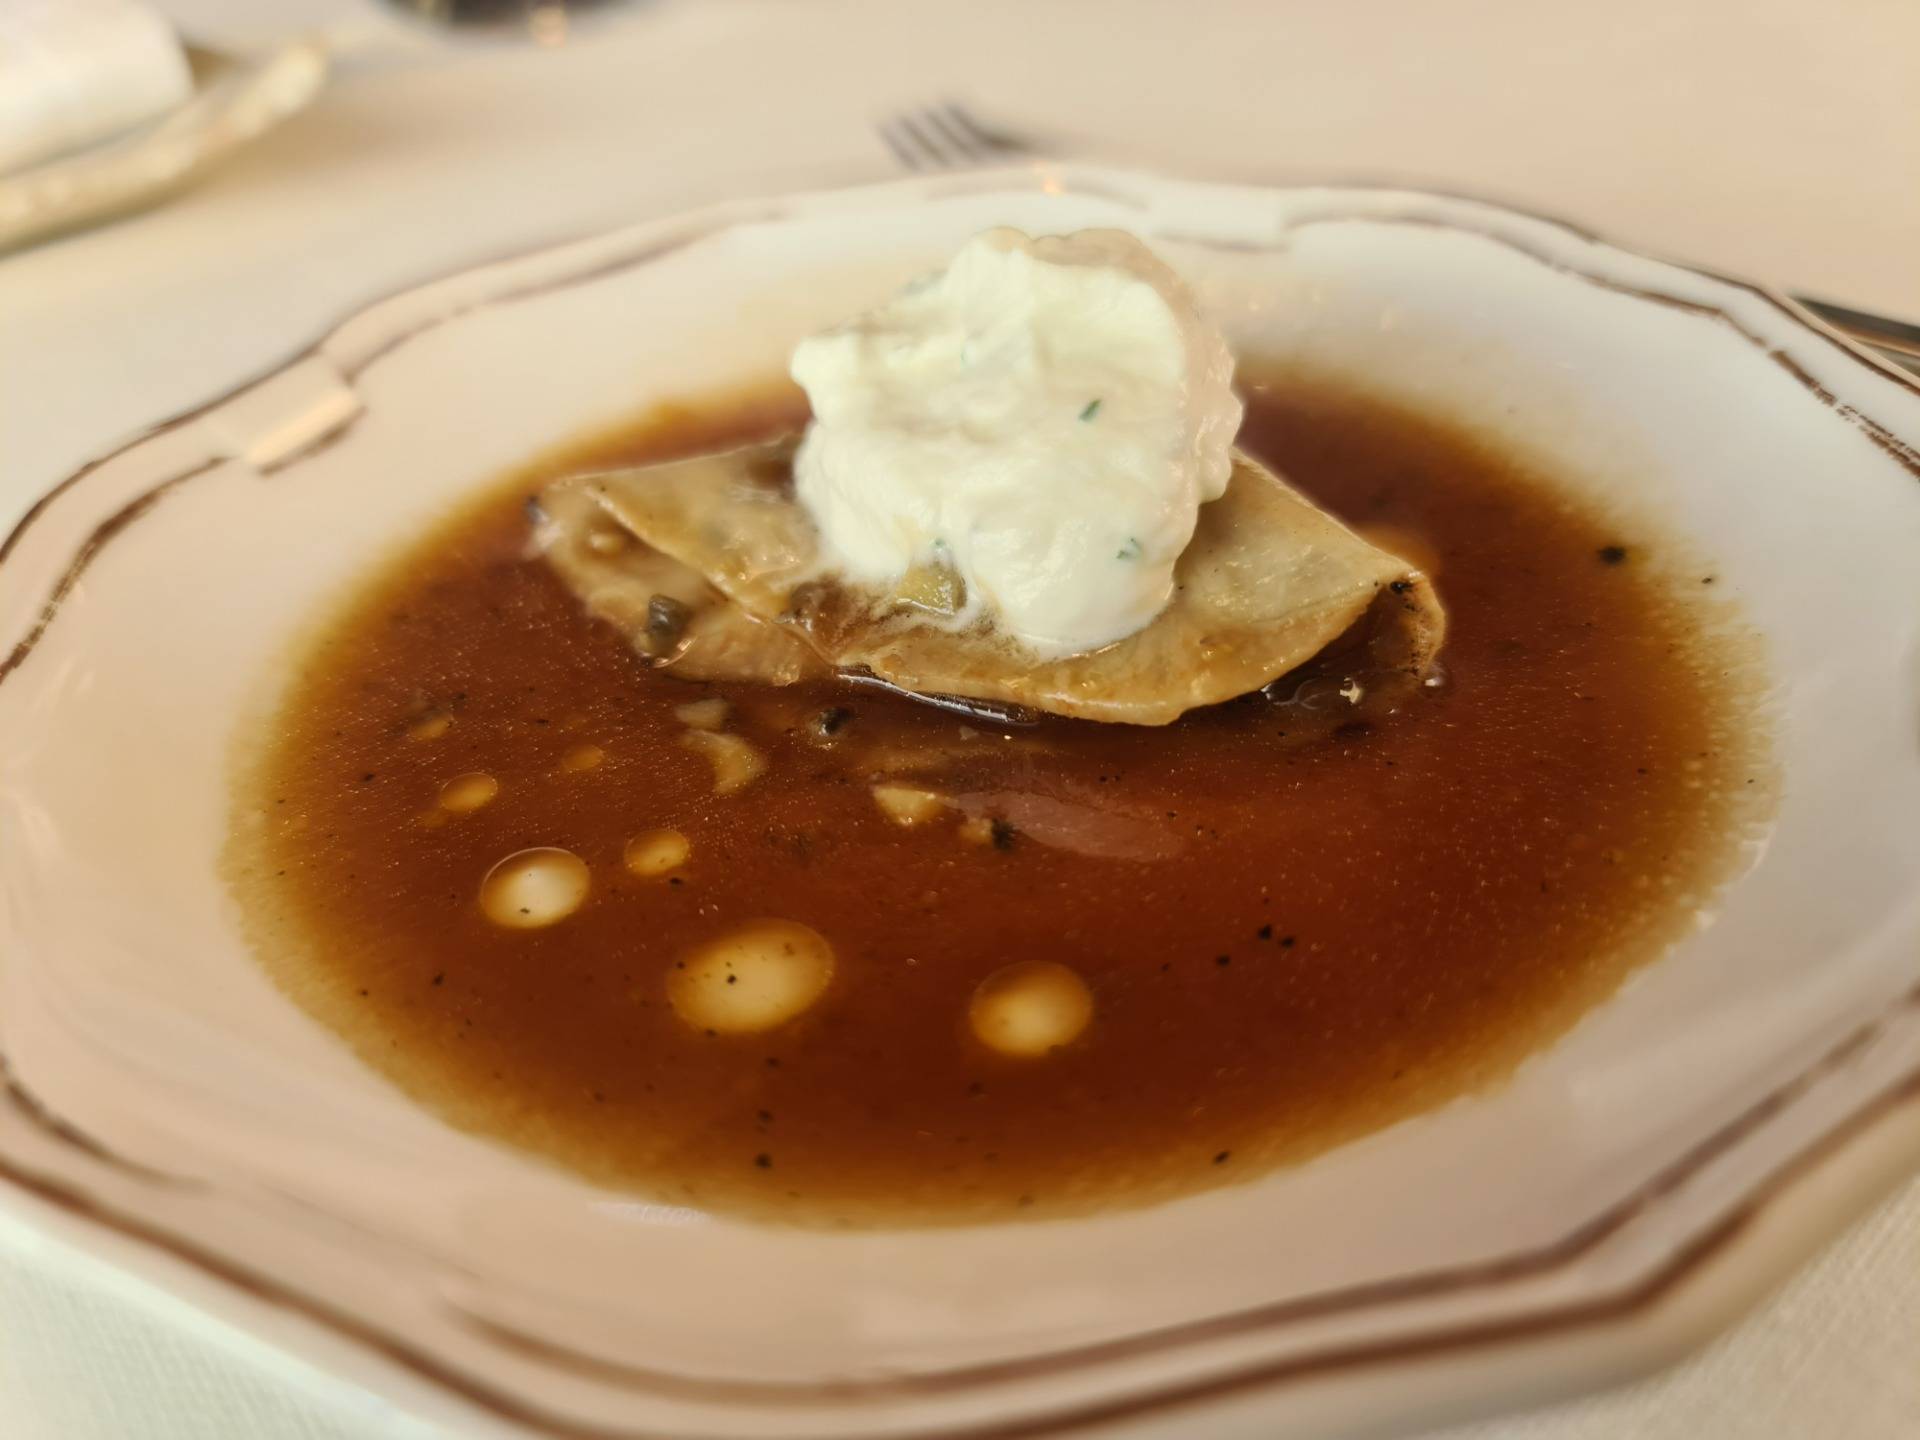 ”Fisherman’s ’morteruelo’ crepe, celeriac roasted in a salt crust and it’s juices” (First main dish) (2).